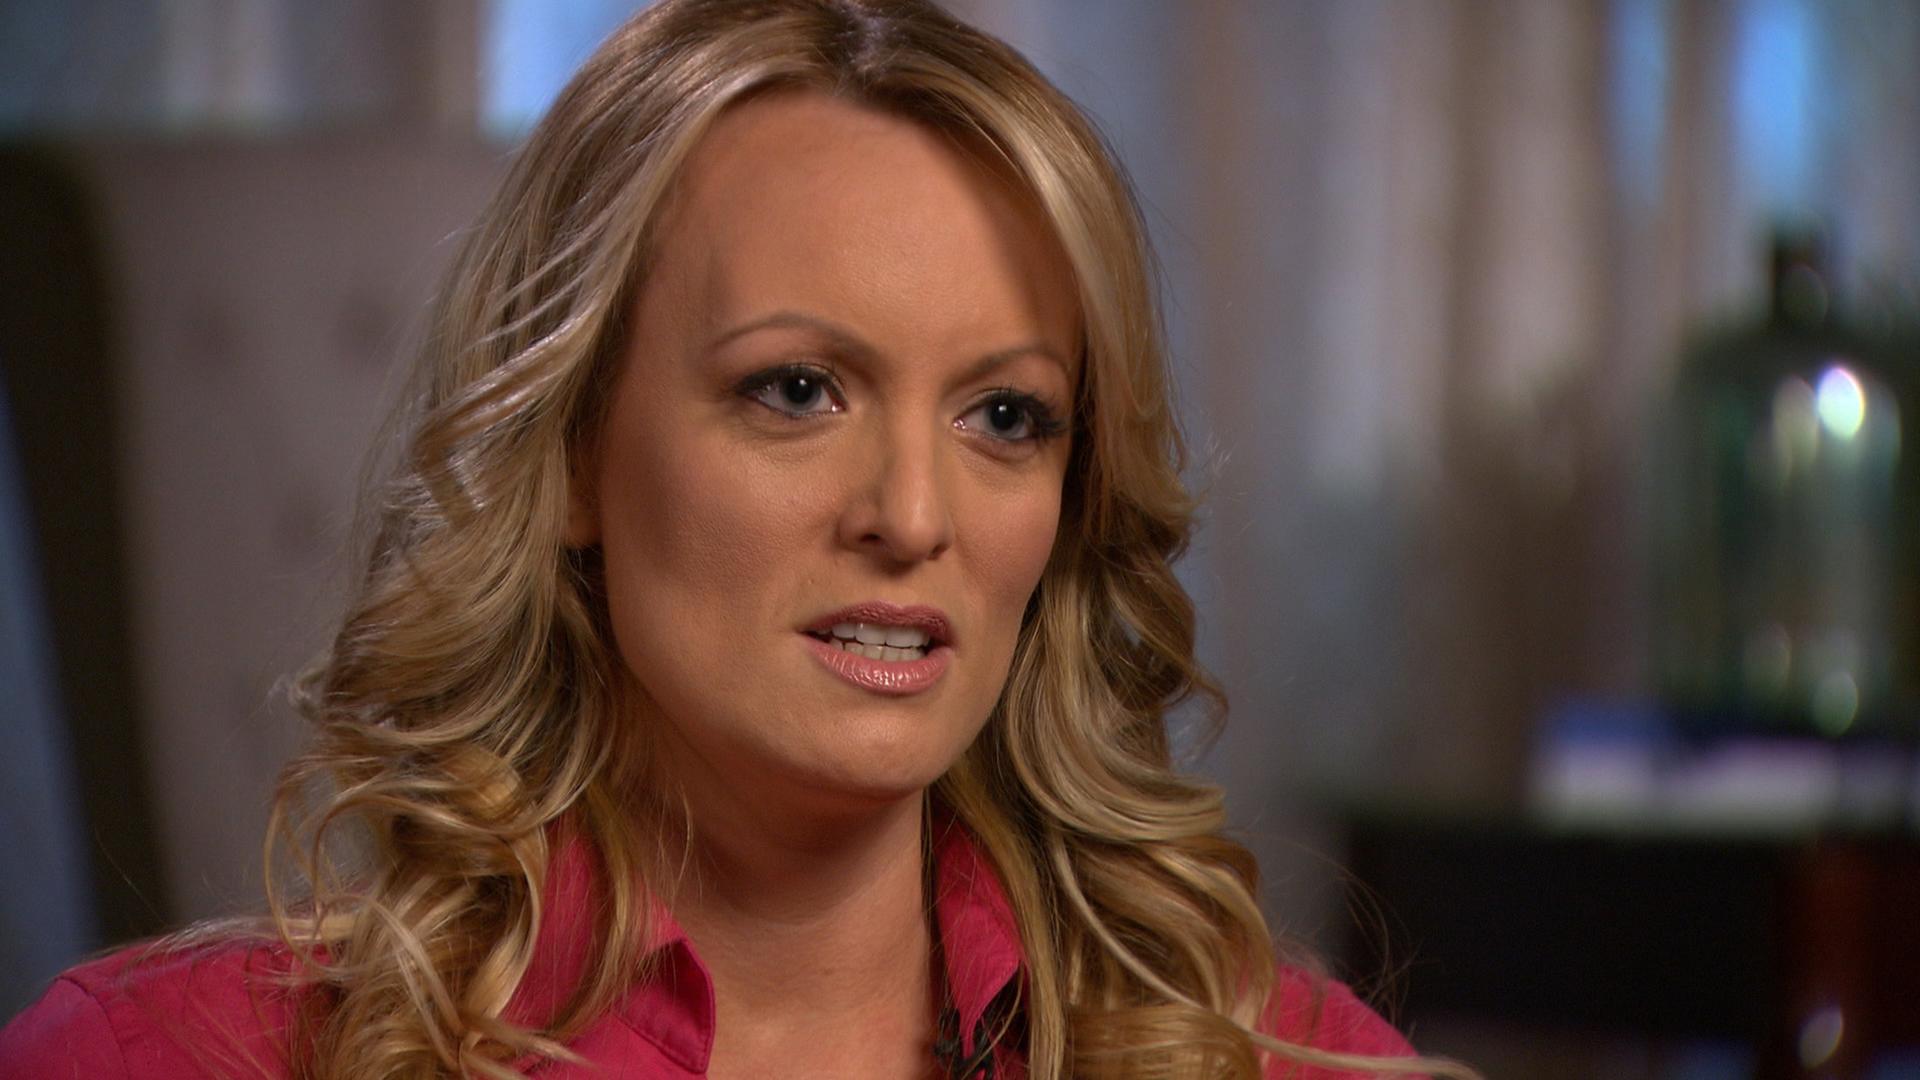 Stormy Daniels, an adult film star and director whose real name is Stephanie Clifford is interviewed by Anderson Cooper of CBS News' 60 Minutes.